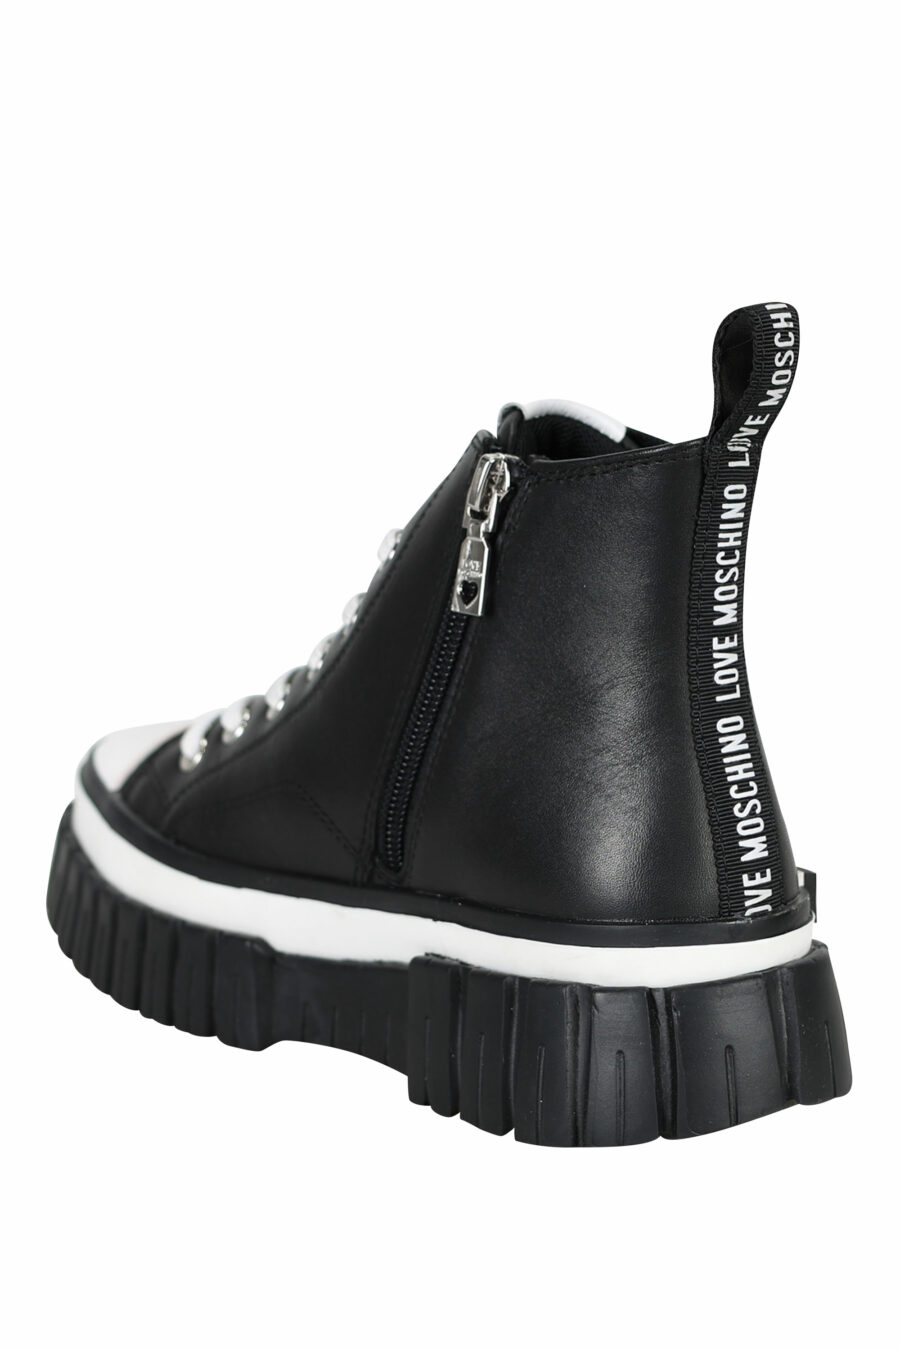 Black ankle boots with white laces and mini-logo - 8050142937599 3